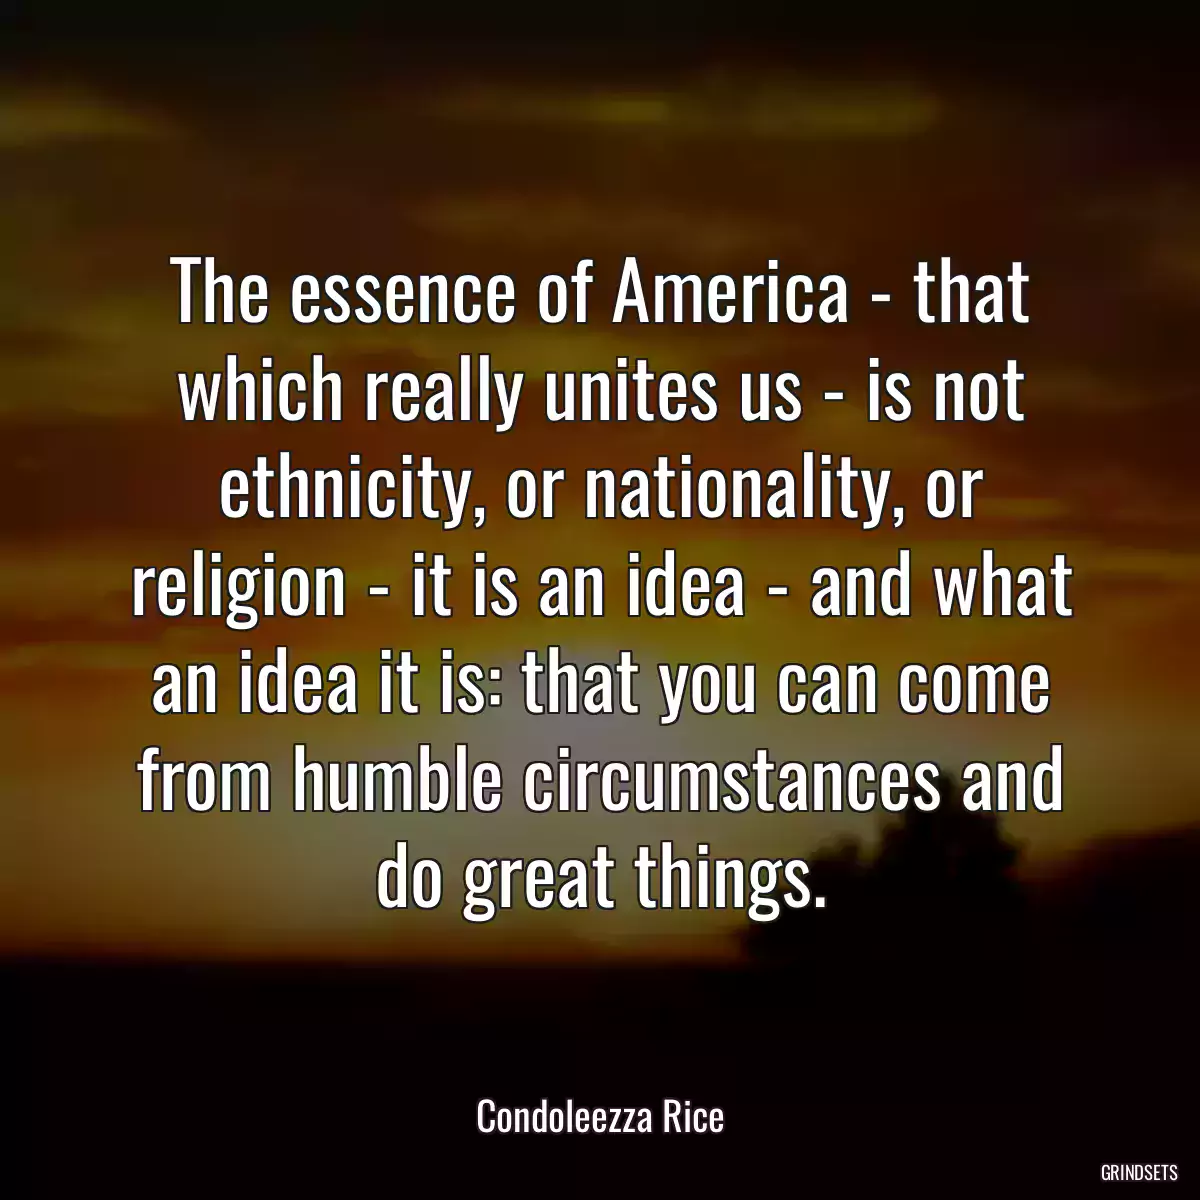 The essence of America - that which really unites us - is not ethnicity, or nationality, or religion - it is an idea - and what an idea it is: that you can come from humble circumstances and do great things.